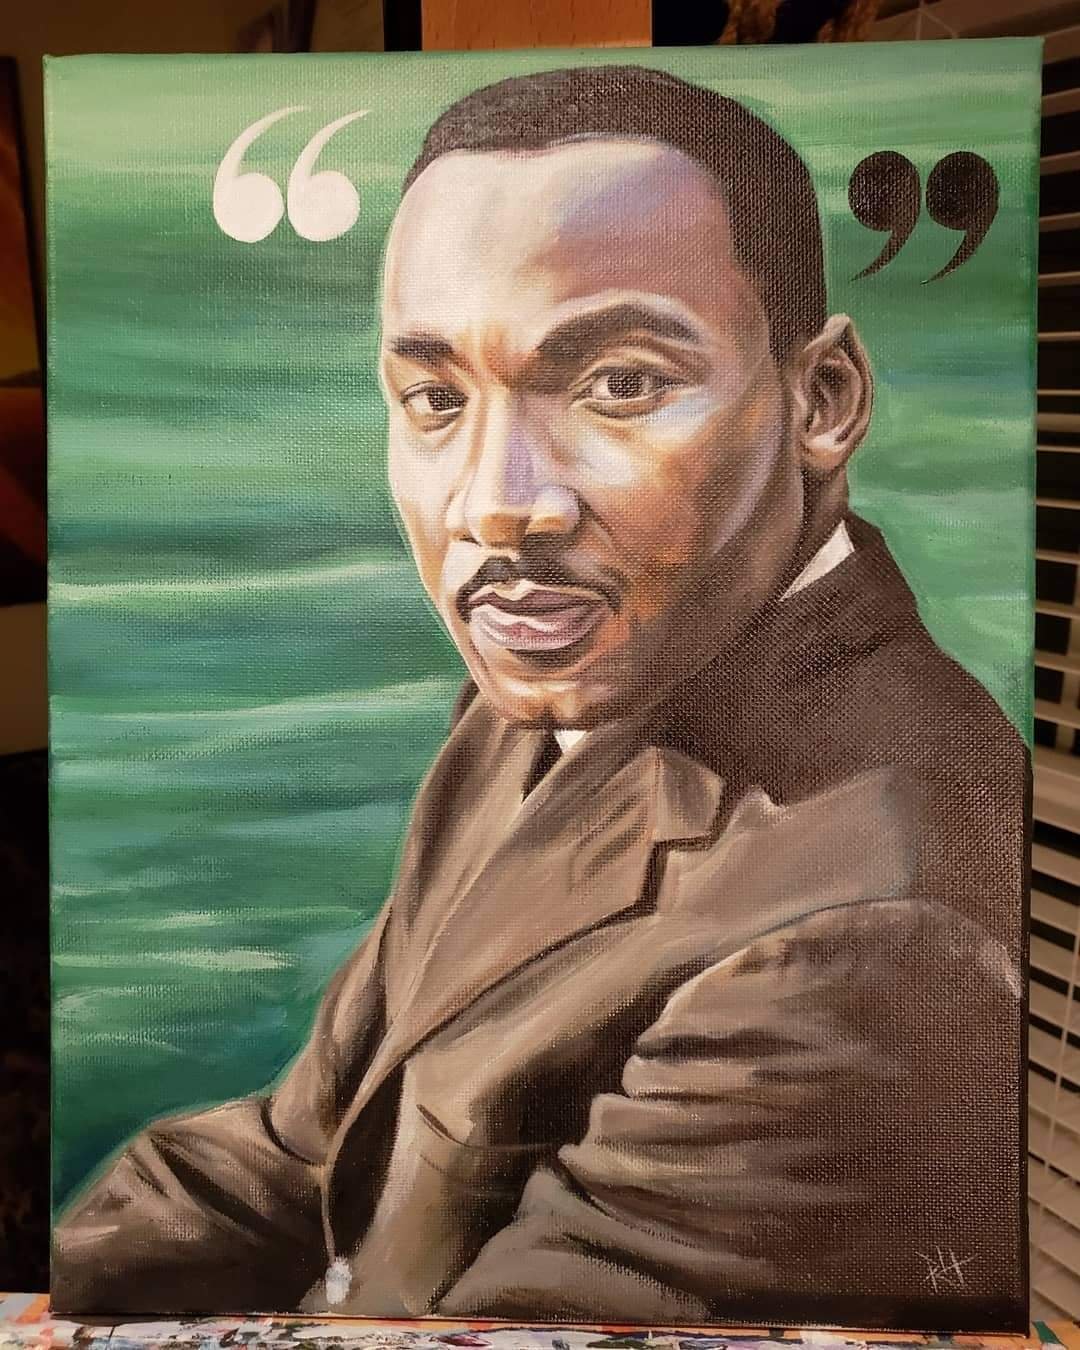 "Dr. King in Quotes"